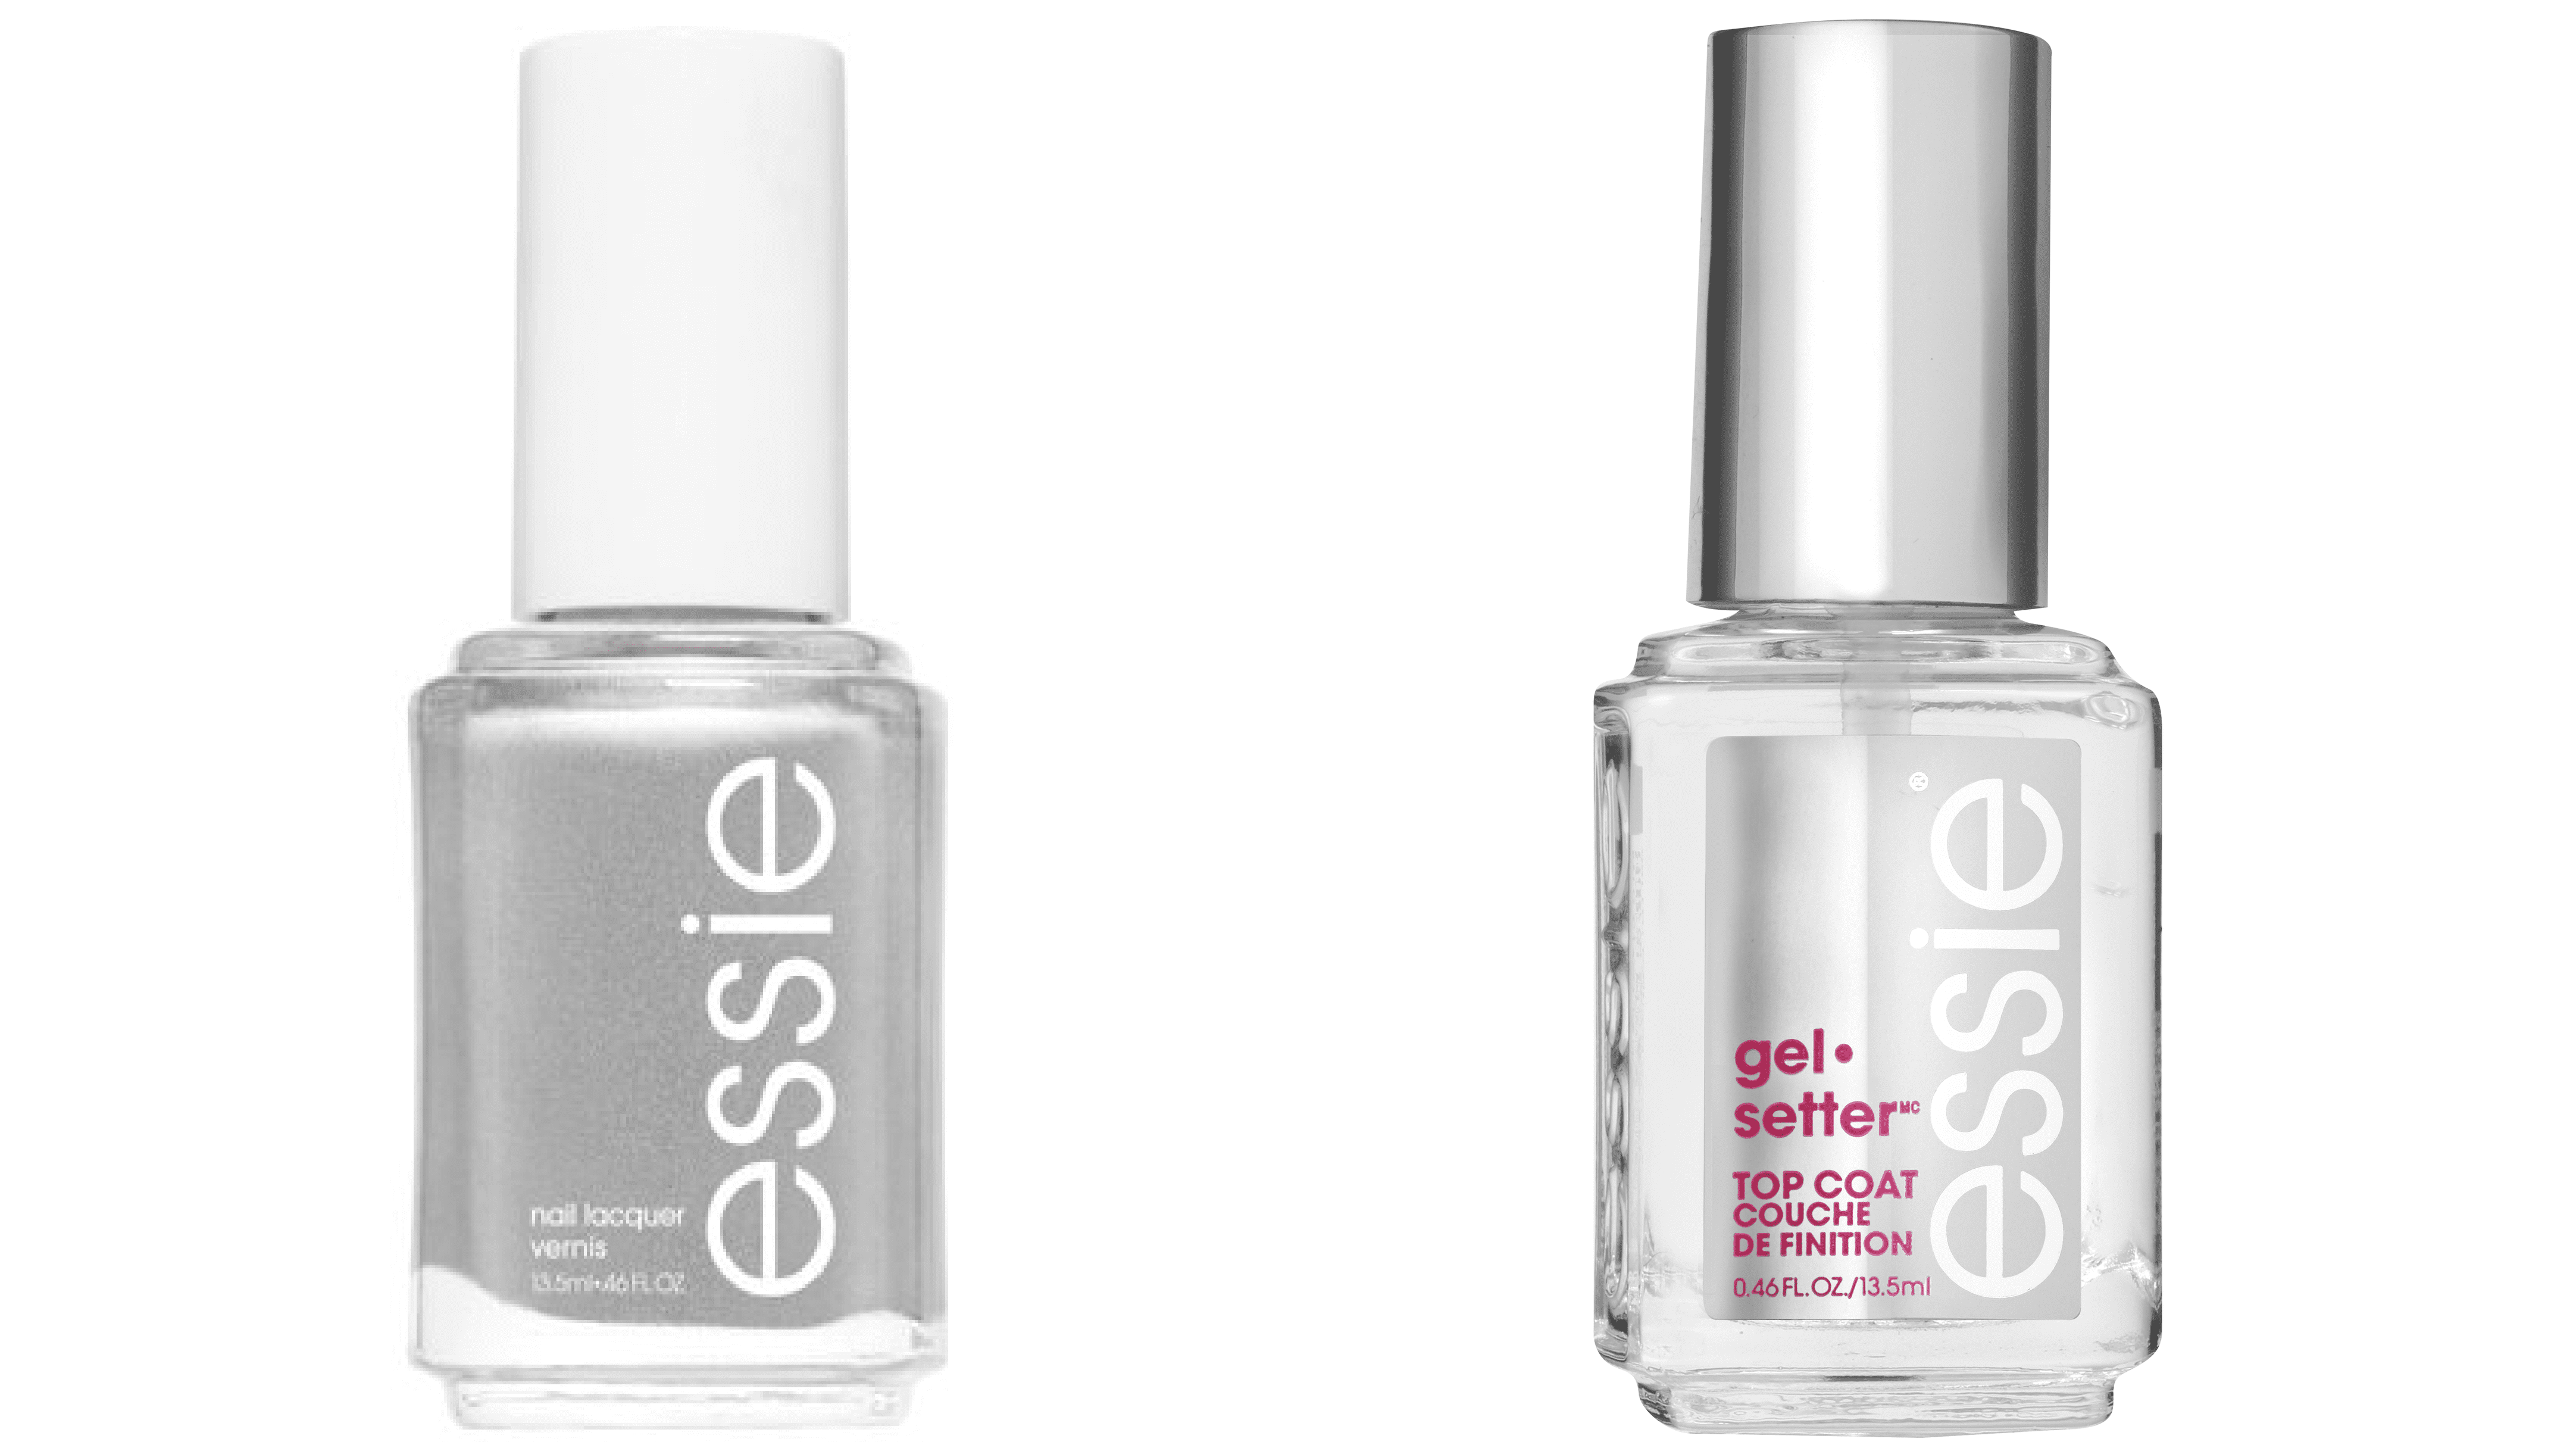 Essie Nail Polish in "No Place Like Chrome" - wide 4